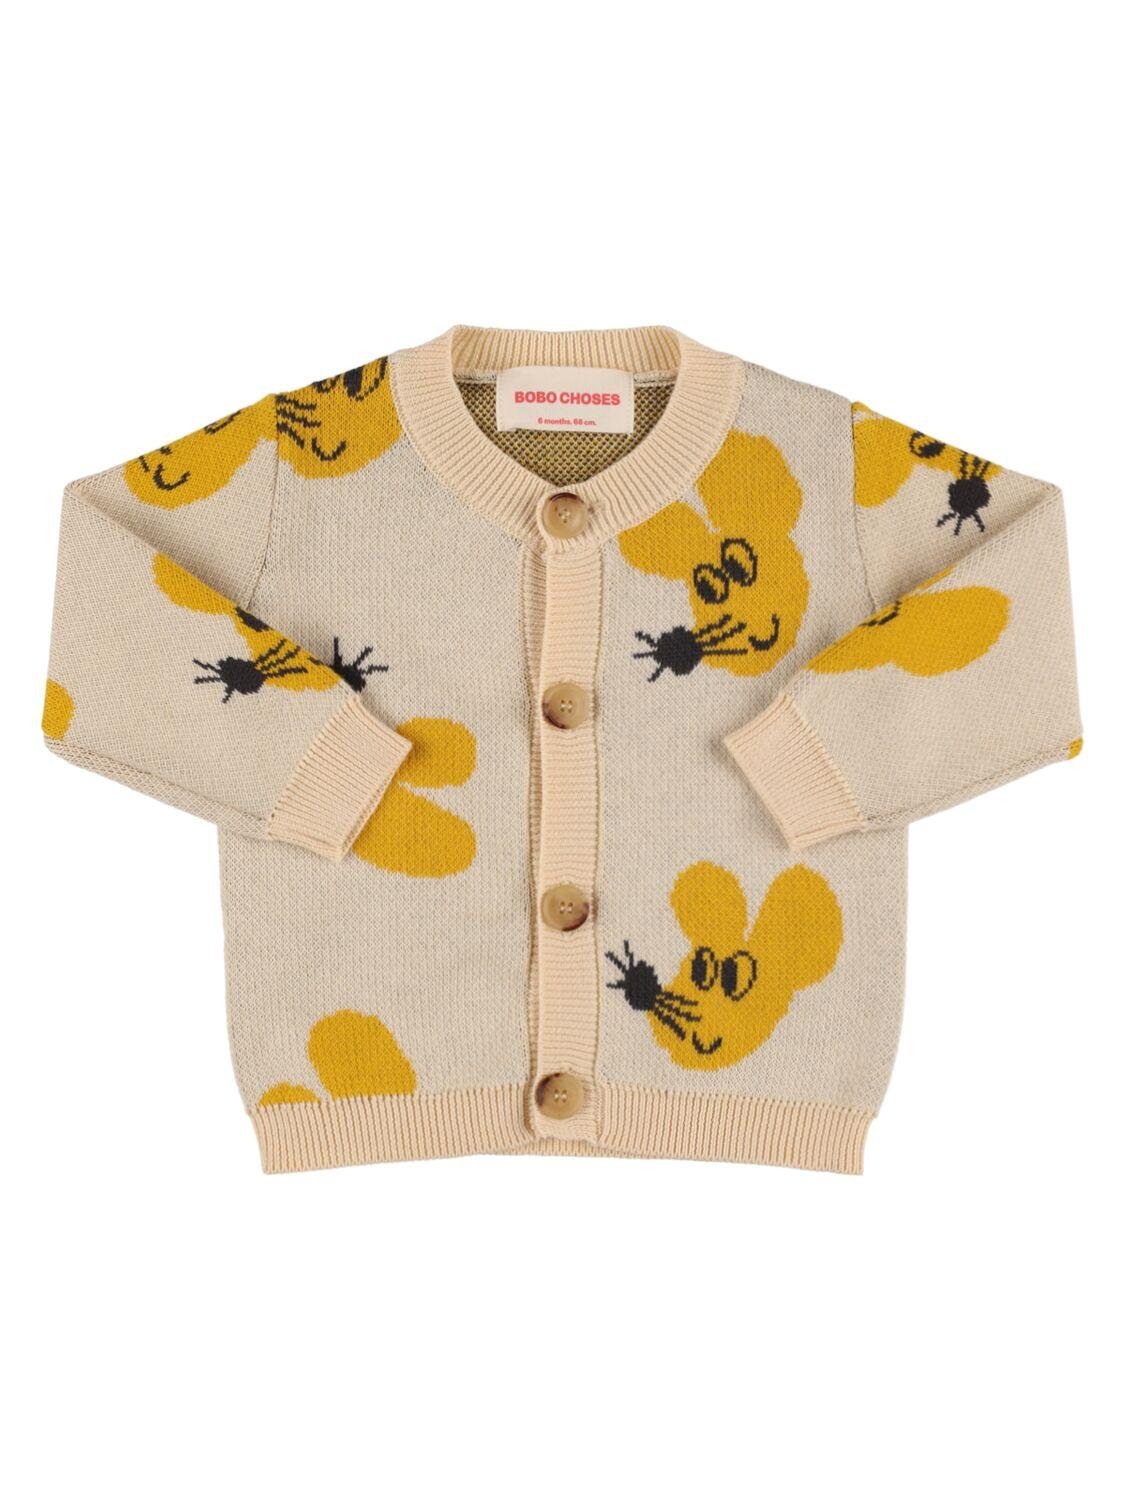 Mouse Print Cotton Knit Cardigan by BOBO CHOSES